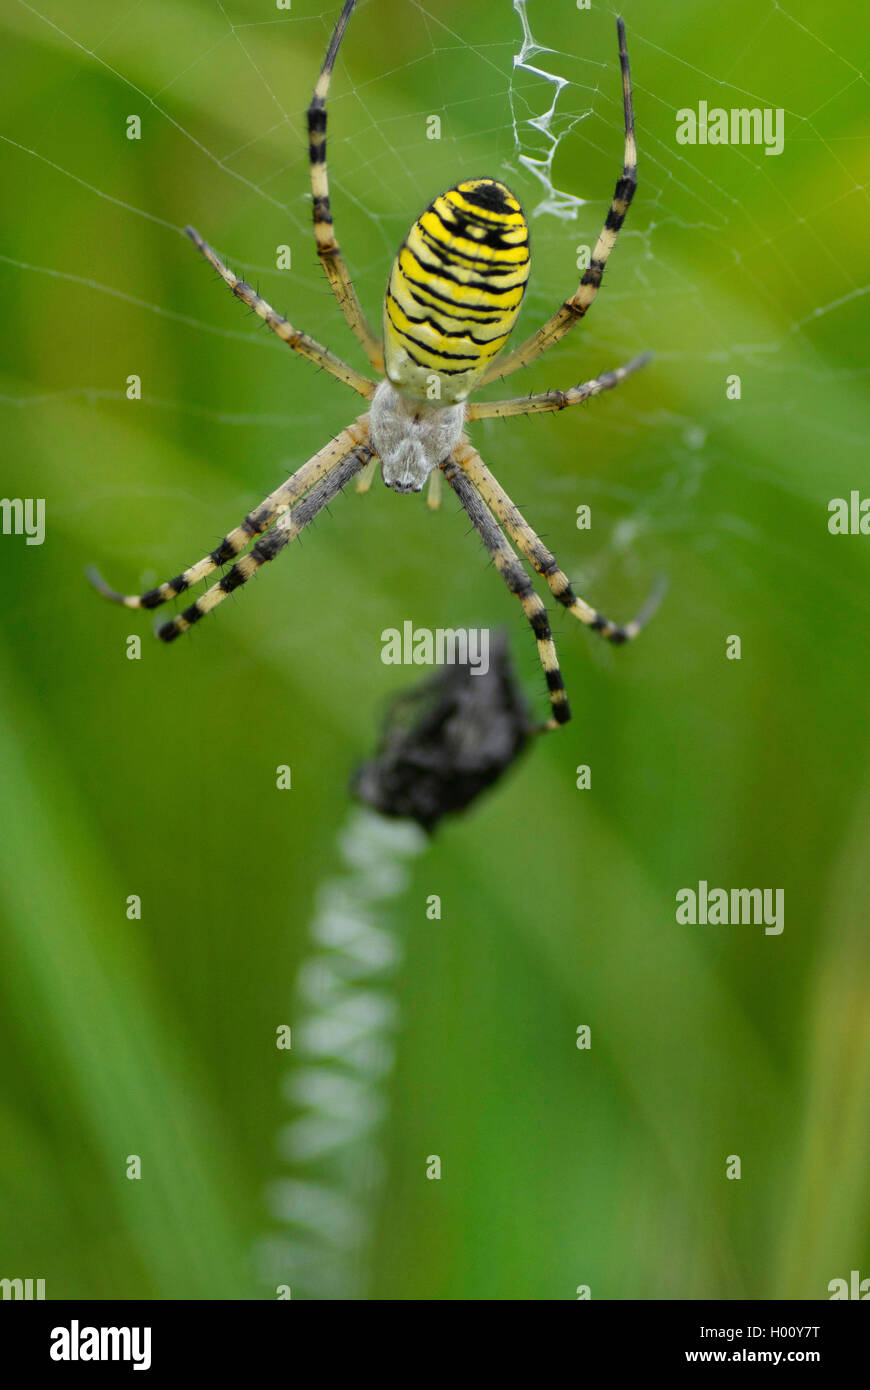 Tiger Spinne High Resolution Stock Photography and Images - Alamy